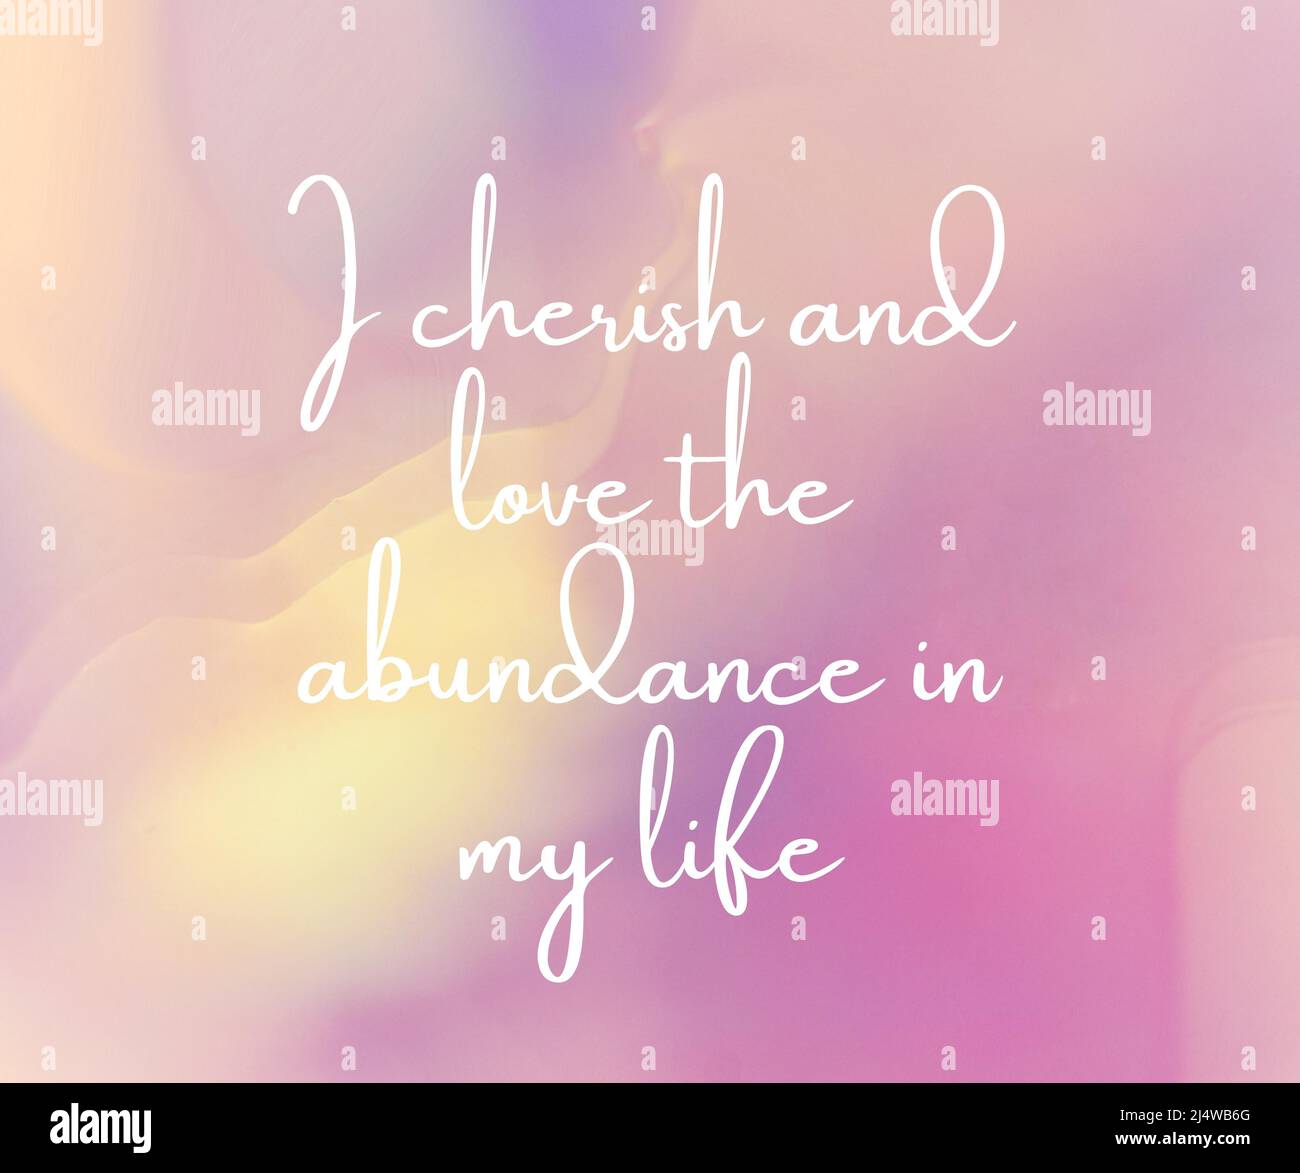 Daily affirmation quote image: I cherish the love and abundance in my life  Stock Photo - Alamy